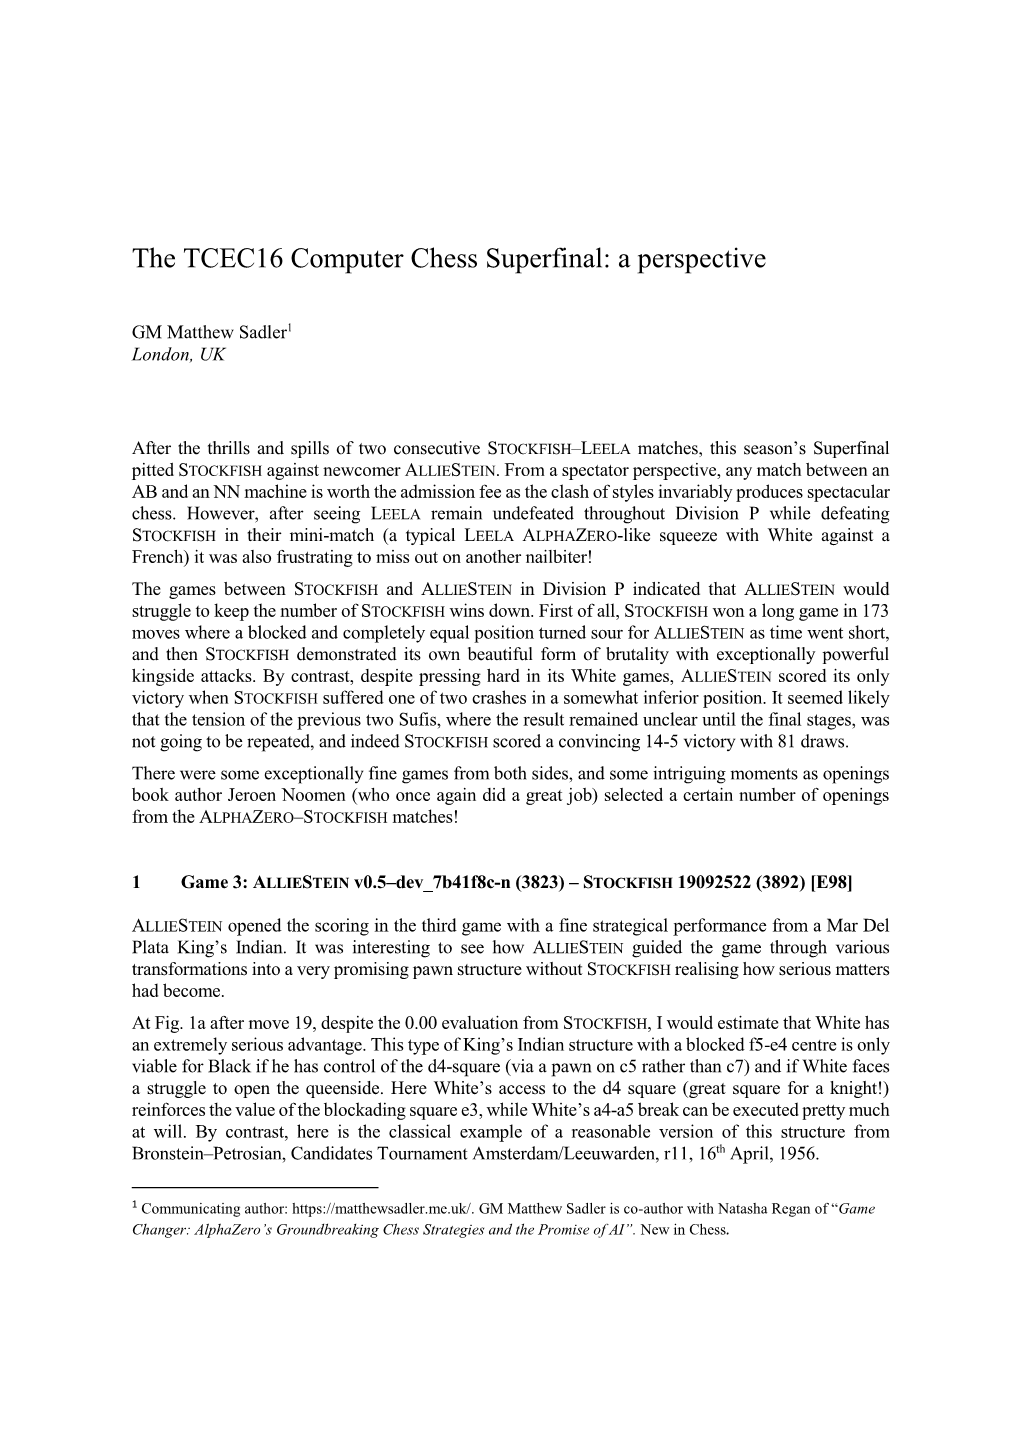 The TCEC16 Computer Chess Superfinal: a Perspective